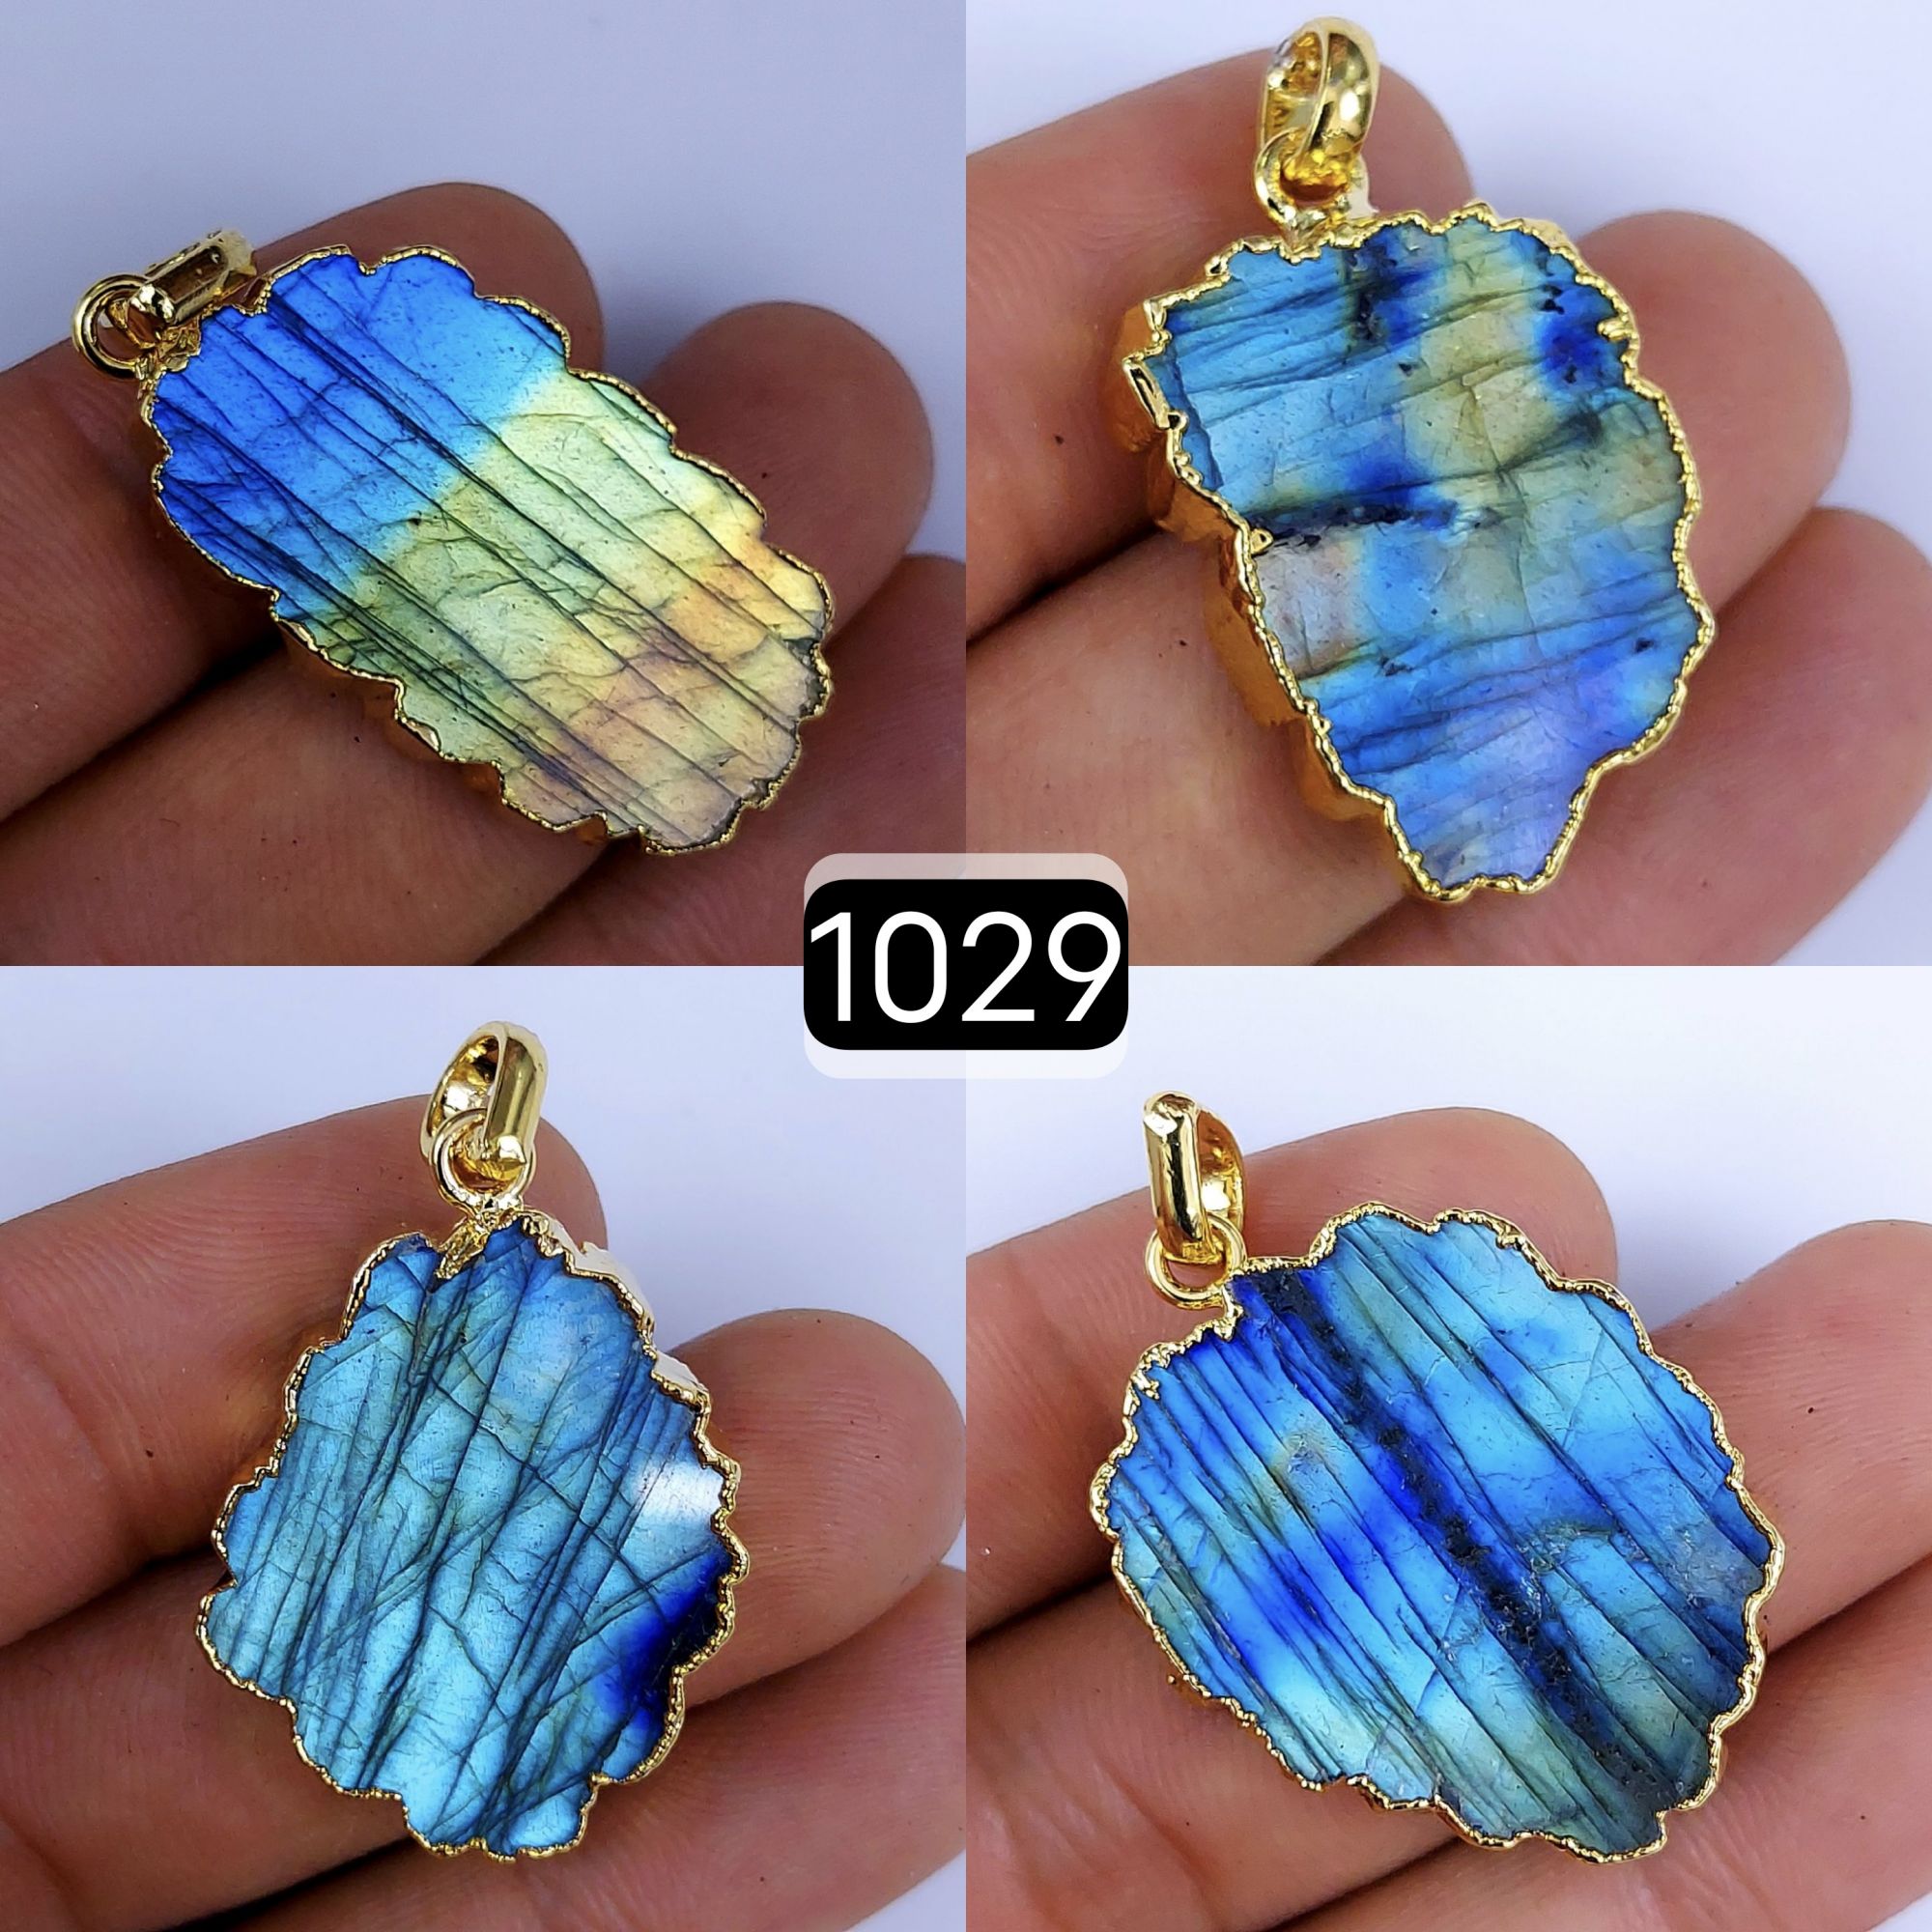 159Cts Natural Blue Labradorite Gold Electroplated Slice Pendant 32x18 22x12mm#1029